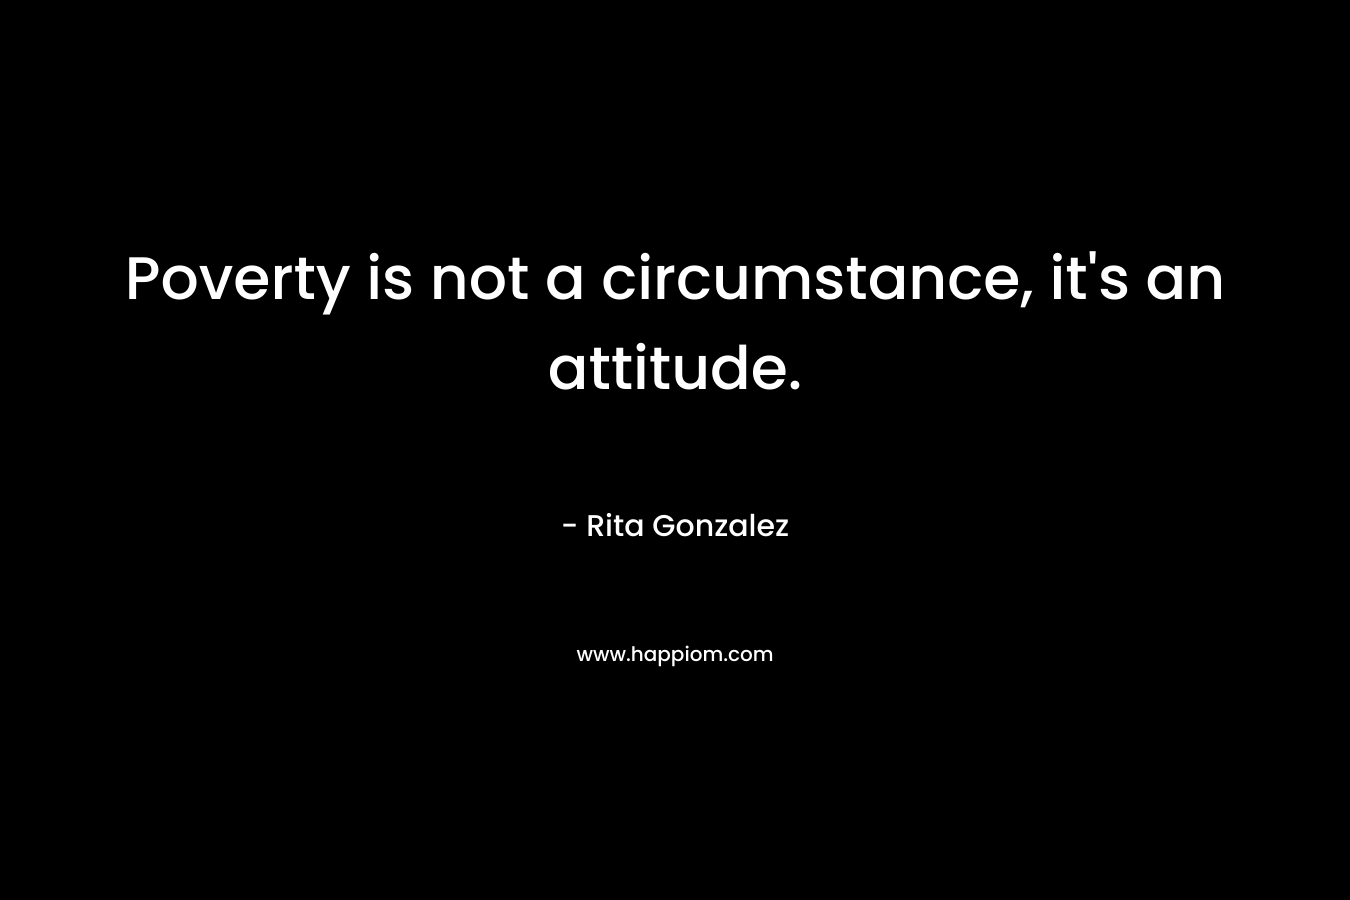 Poverty is not a circumstance, it's an attitude.